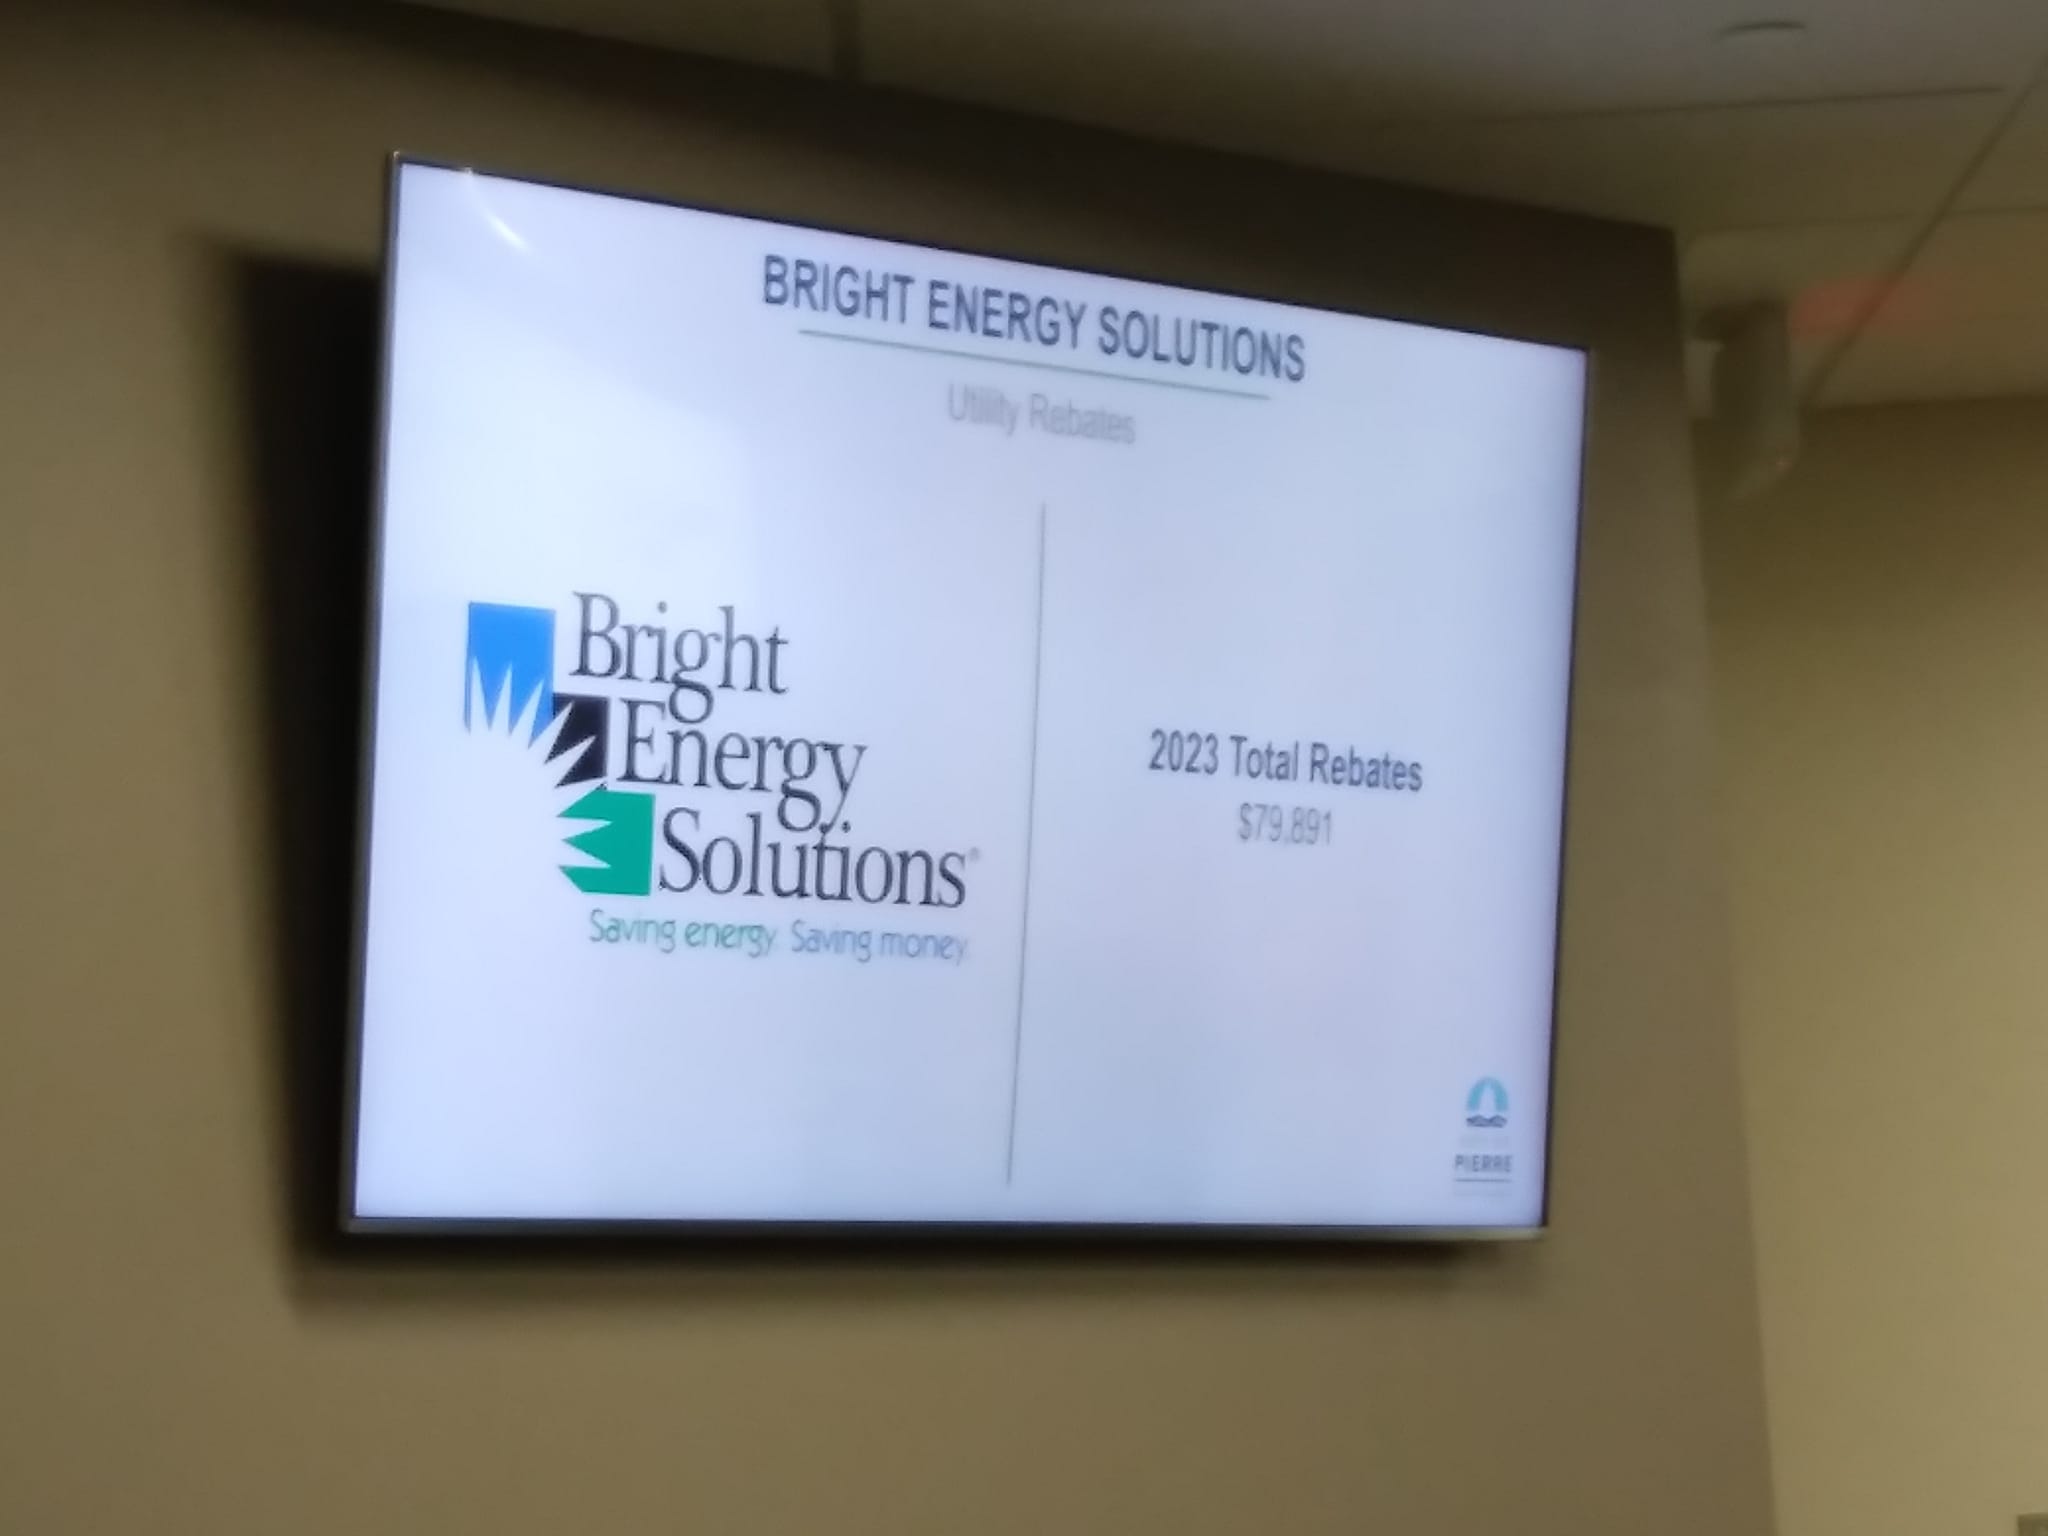 City Of Pierre Reminding Residents Of Bright Energy Solutions Program To Save Money On City Utilities